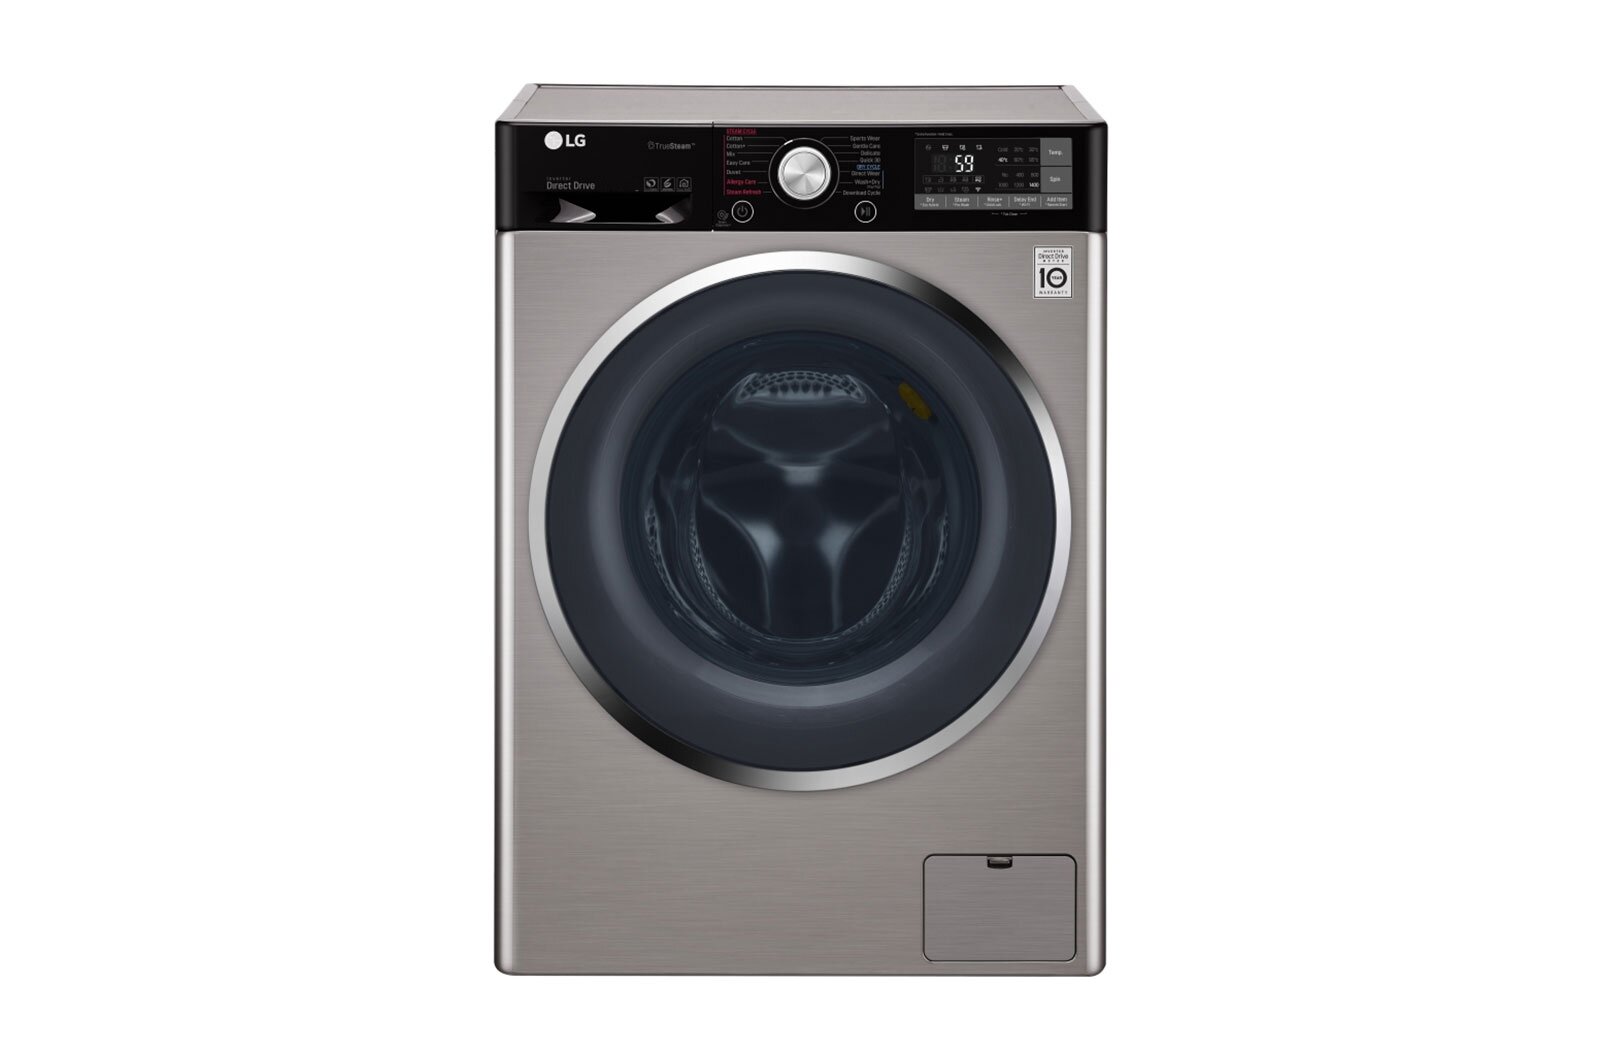 Review: LG Day Smart Dryer — Every 7kg Living Washer / Dry) (10.5kg and Wash